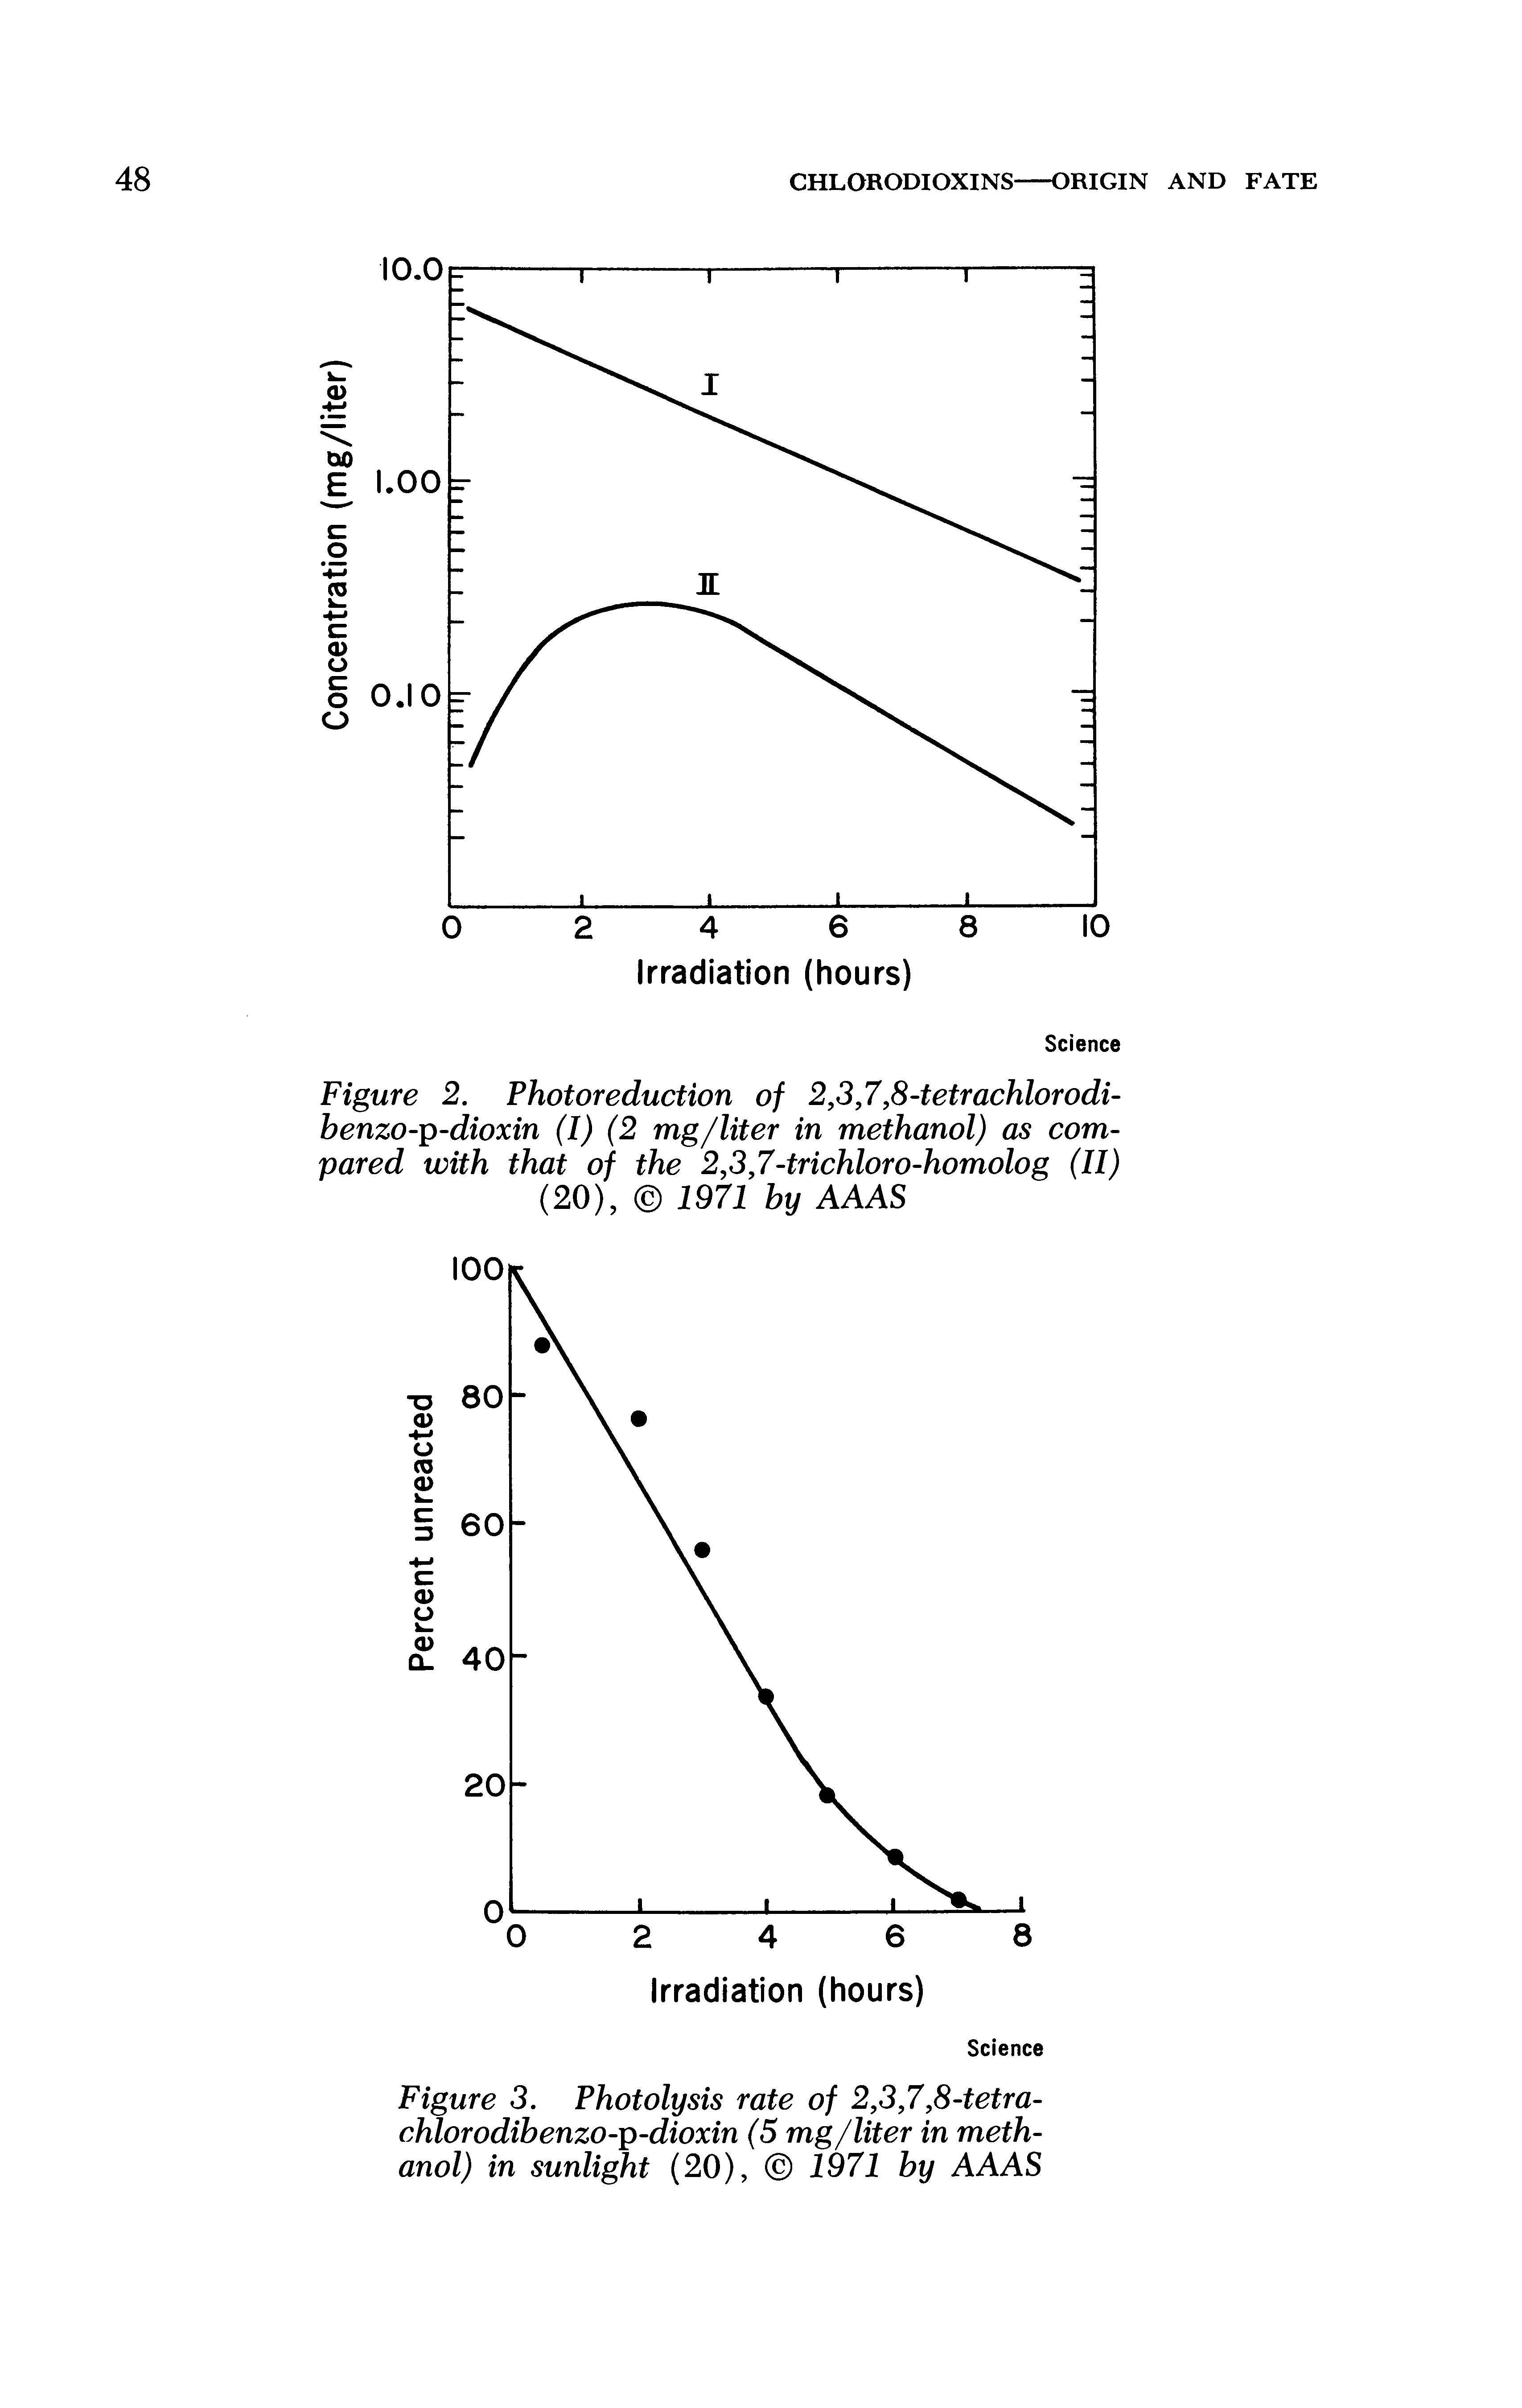 Figure 3. Photolysis rate of 2,3,7,8-tetra-chlorodibenzo-p-dioxin (5 mg/liter in methanol) in sunlight (20), 1971 by AAAS...